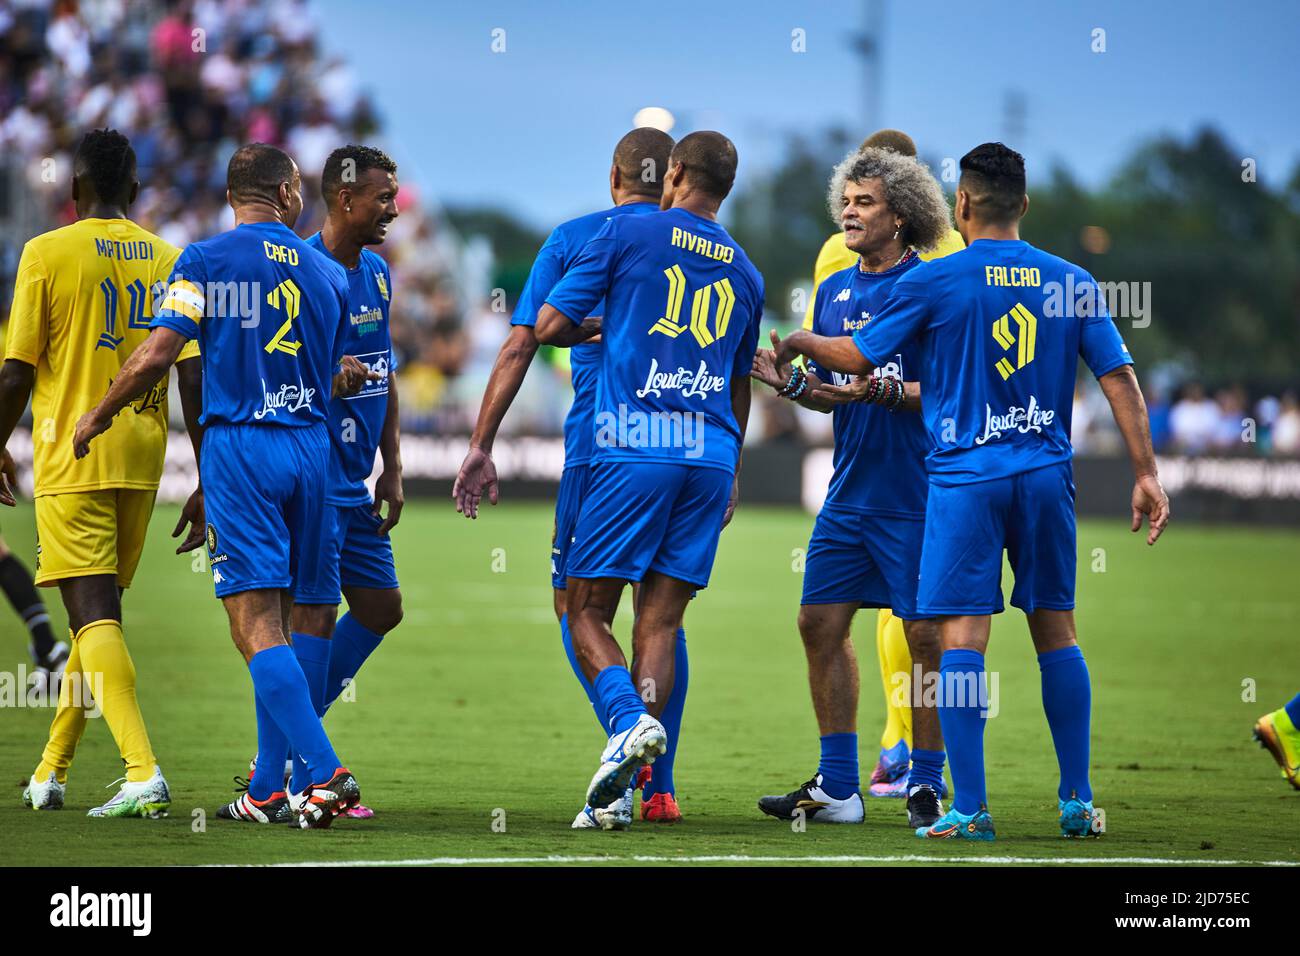 Fort Lauderdale, FL, USA. 18th June 2022. 2C - Cafu - Former AC Milan and Brazilian national team player, 10C - Rivaldo - Brazilian national team, FC Barcelona player, 9C - Radamel Falcao - Rayo Vallecano, Colombian national team player during soccer match The Beautiful Game by R10 and RC3 owned global soccer football icons and Brazilian duo Ronaldinho and Roberto Carlos at DRV Pink Stadium in Florida, USA. Credit: Yaroslav Sabitov/YES Market Media/Alamy Live News. Stock Photo